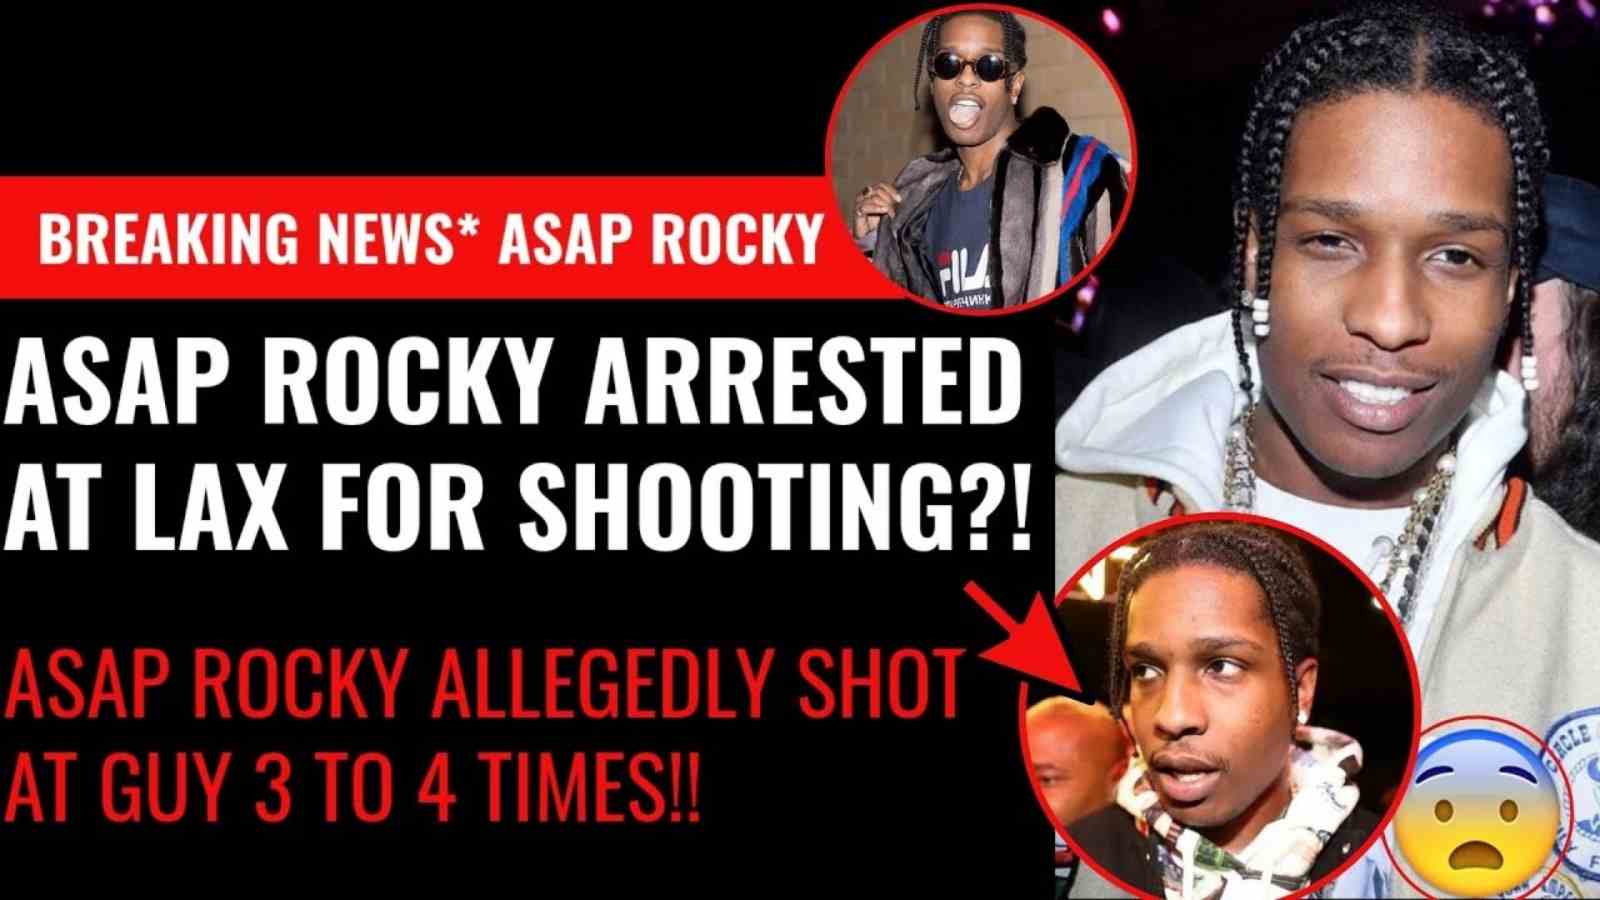 Rapper ASAP Rocky arrested at LAX